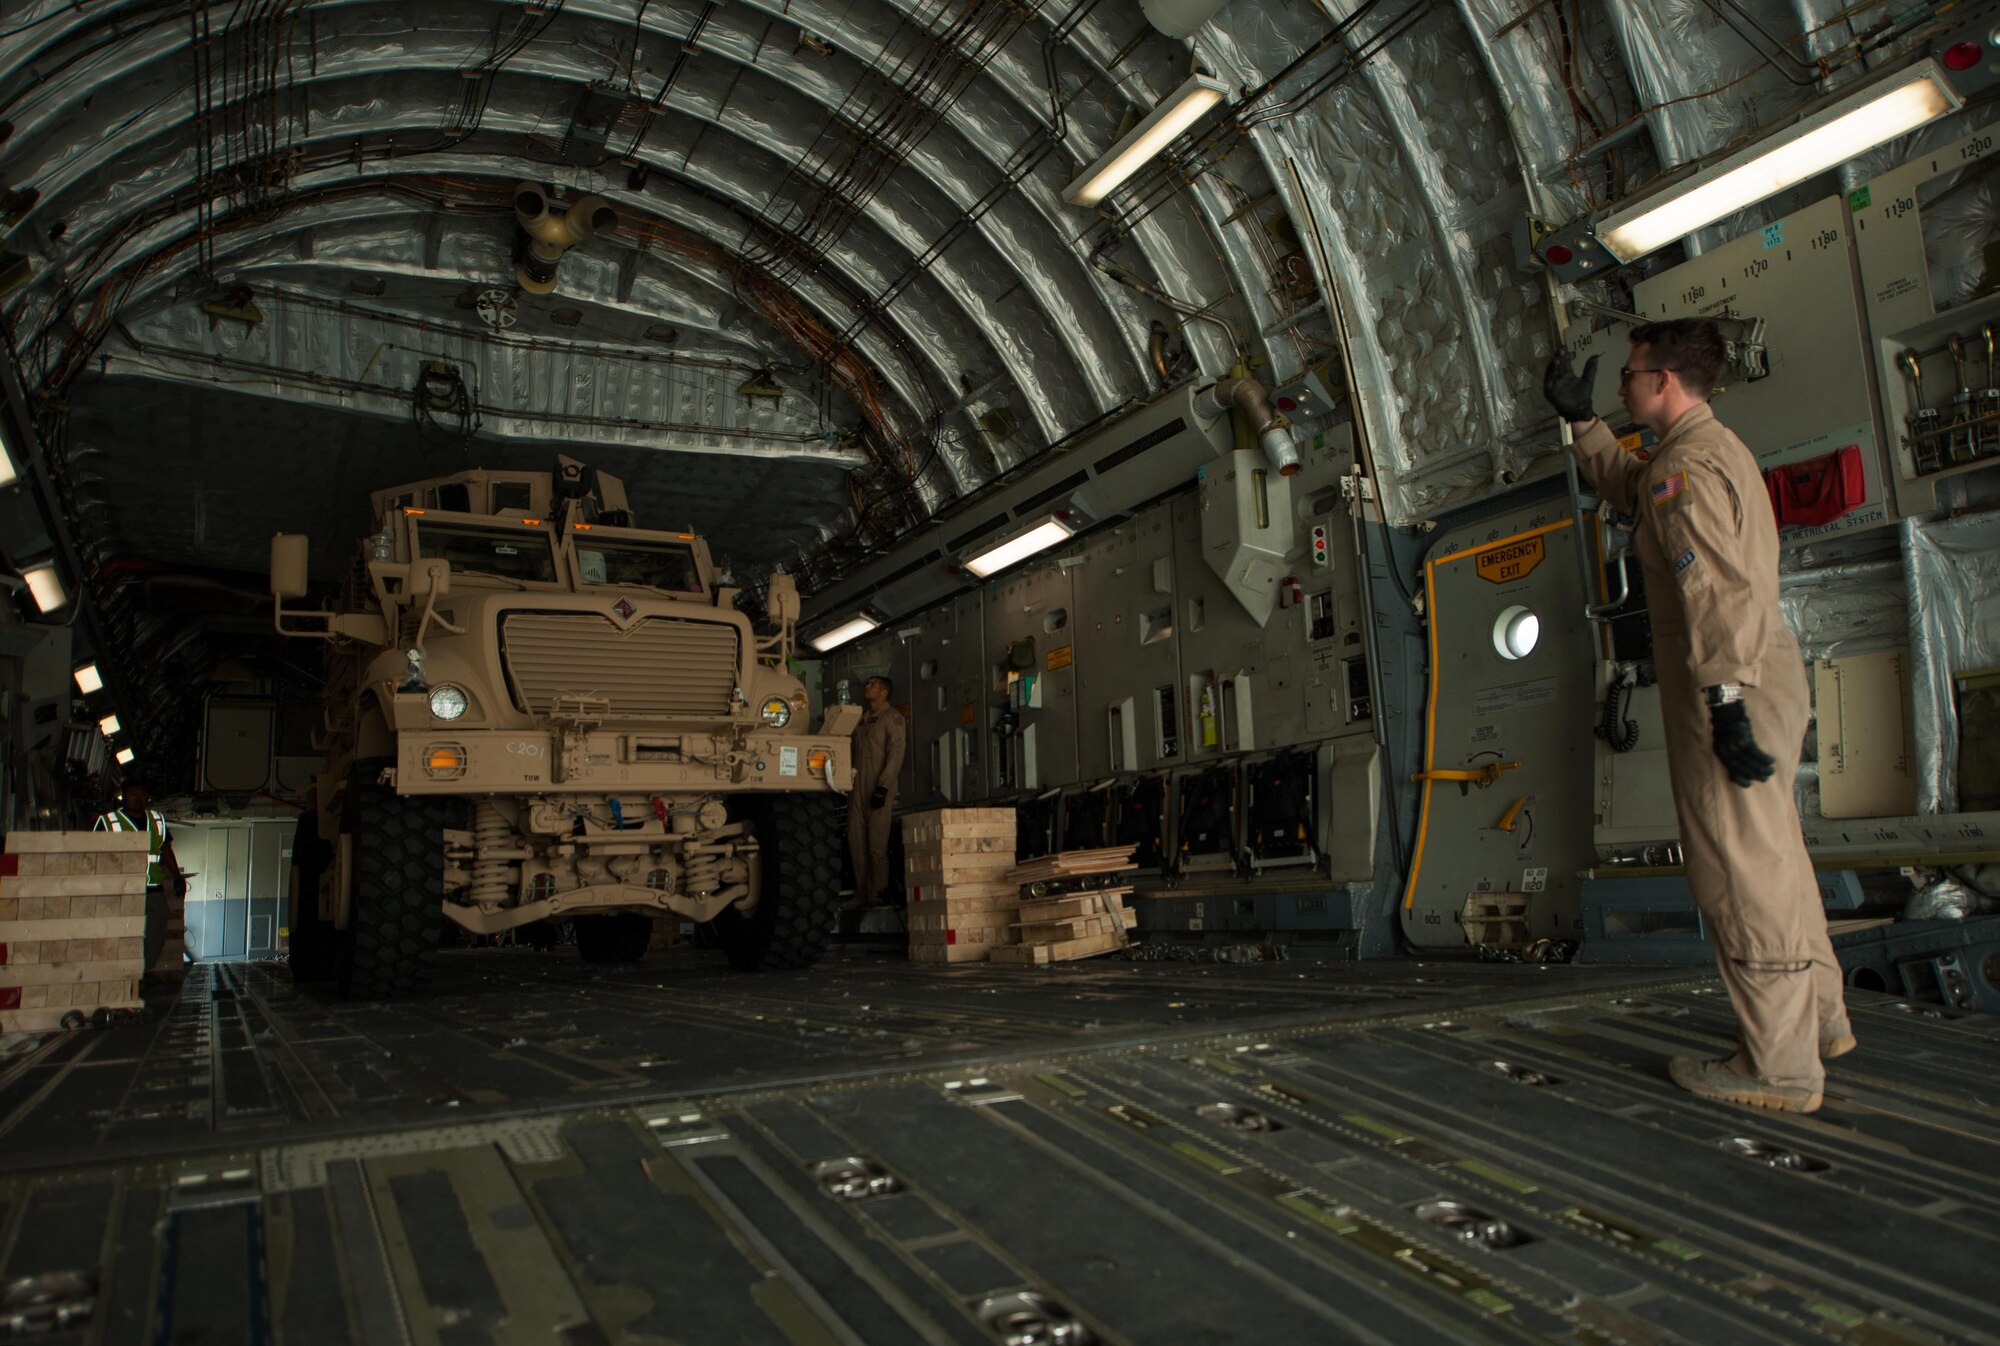 A U.S. Army Mine-Resistant Ambush Protected vehicle is offloaded from an Air Force C-17 Globemaster III aircraft at Bagram Airfield, Afghanistan, Sept. 21, 2015. USAF cargo aircraft have transported 31,500 short tons of cargo throughout Afghanistan this year (U.S. Air Force photo by Tech. Sgt. Joseph Swafford/Released)